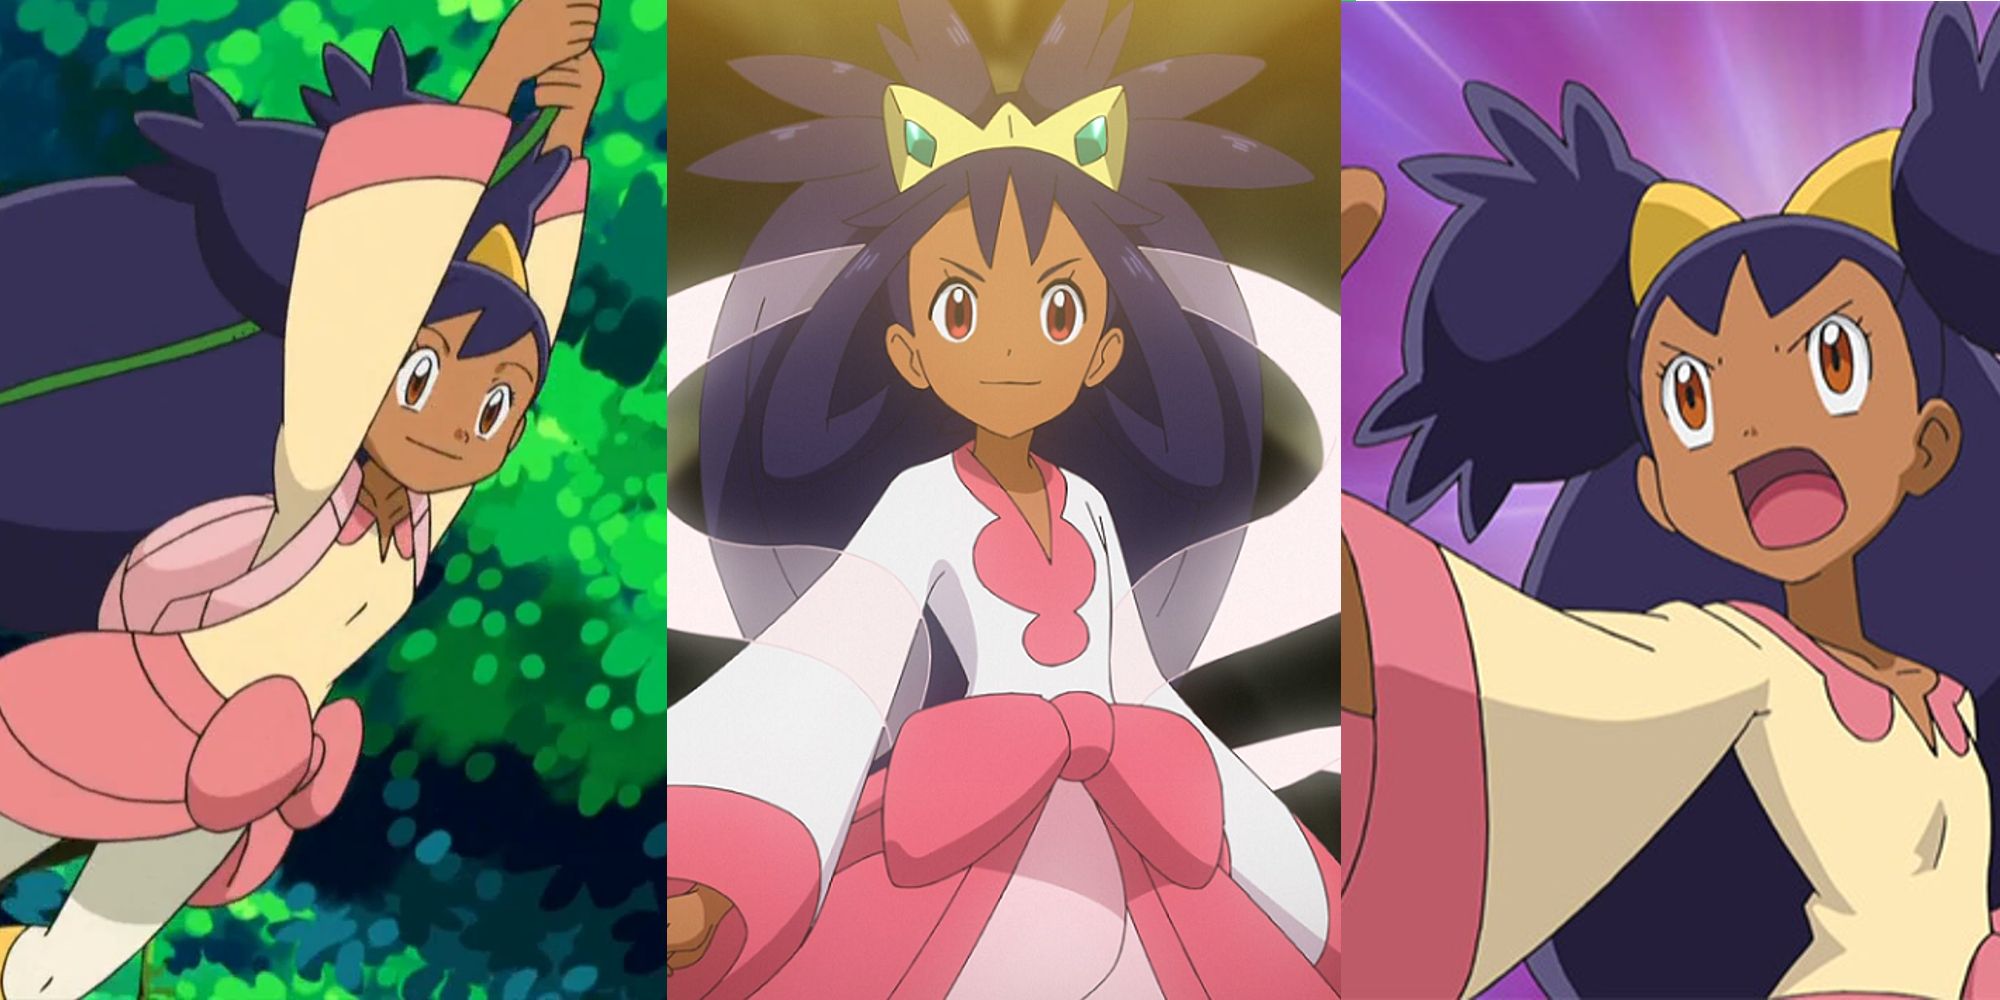 Iris swinging between trees in the anime; Iris appearing in her Unova Champion outfit in Pokemon Journeys; Iris calling out in the middle of a Pokemon battle